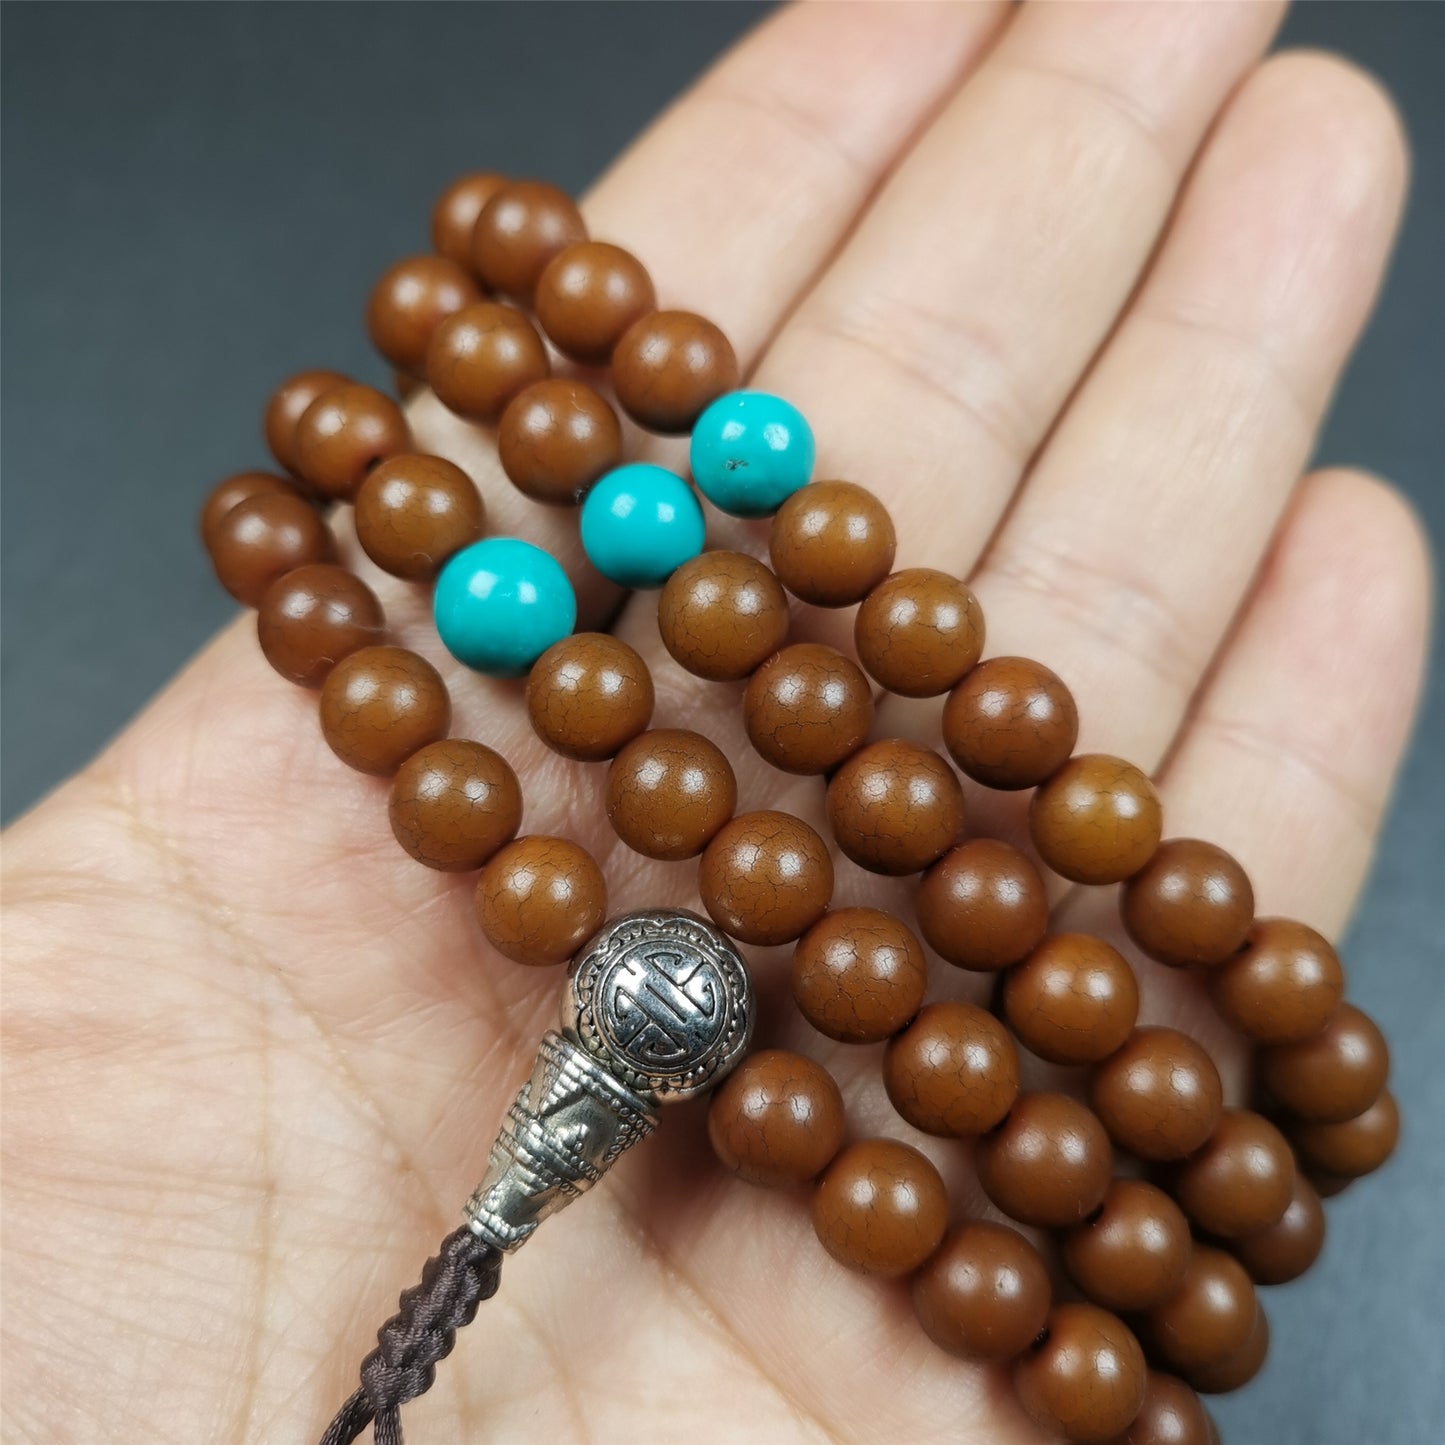 This mala was made by Tibetan craftsme.  It is made of Corypha Linn Seeds, diameter of 8.5mm,0.34 inch,circumference is 90cm,35 inches ,with 3 turquoise bead, end of a white copper guru bead.